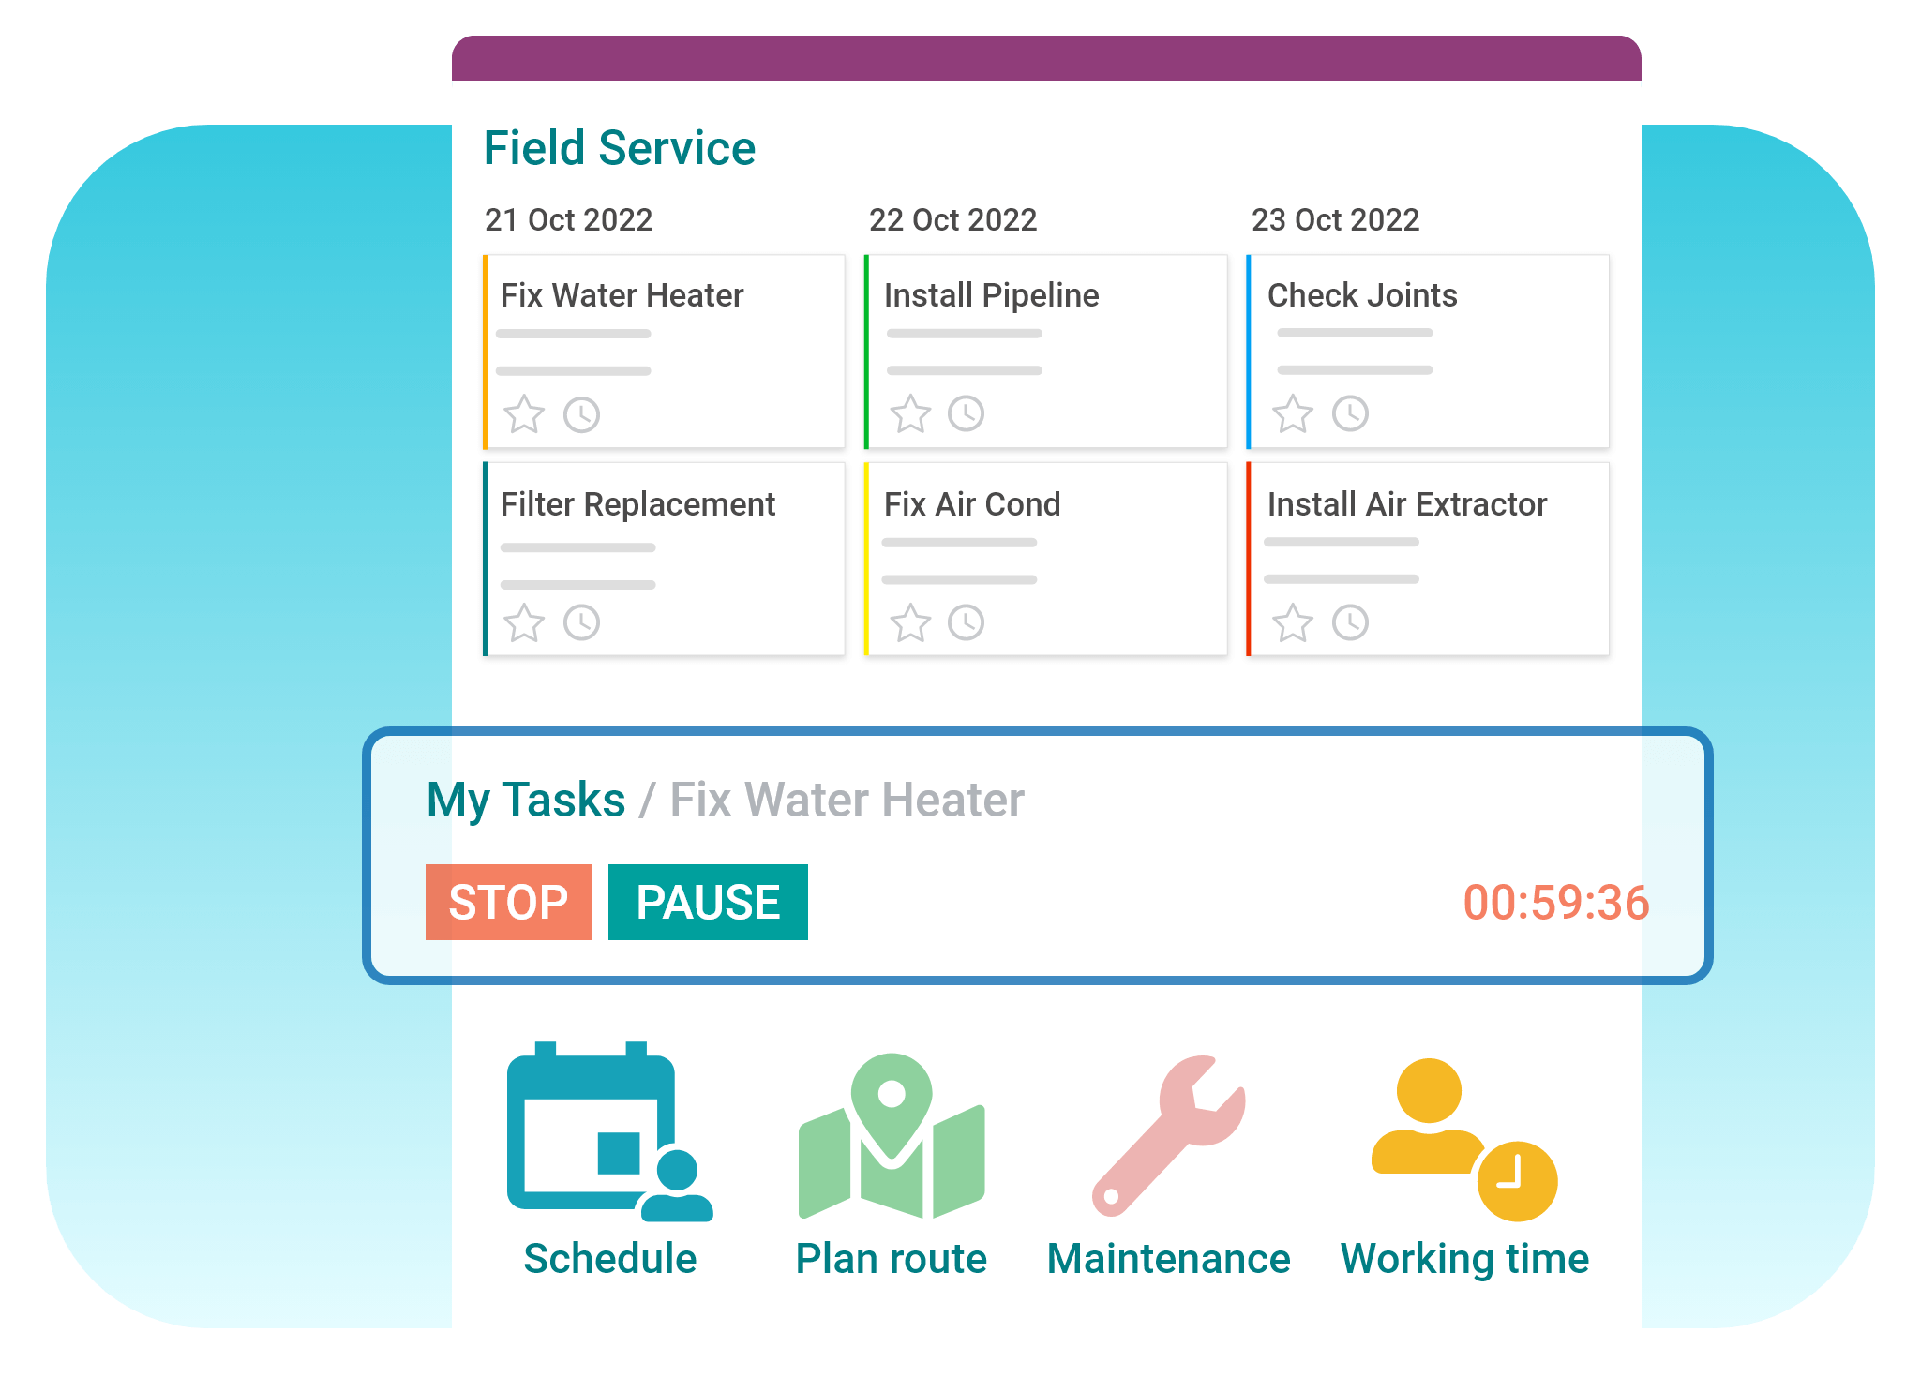 Initiate field service planning by using Odoo ERP system.